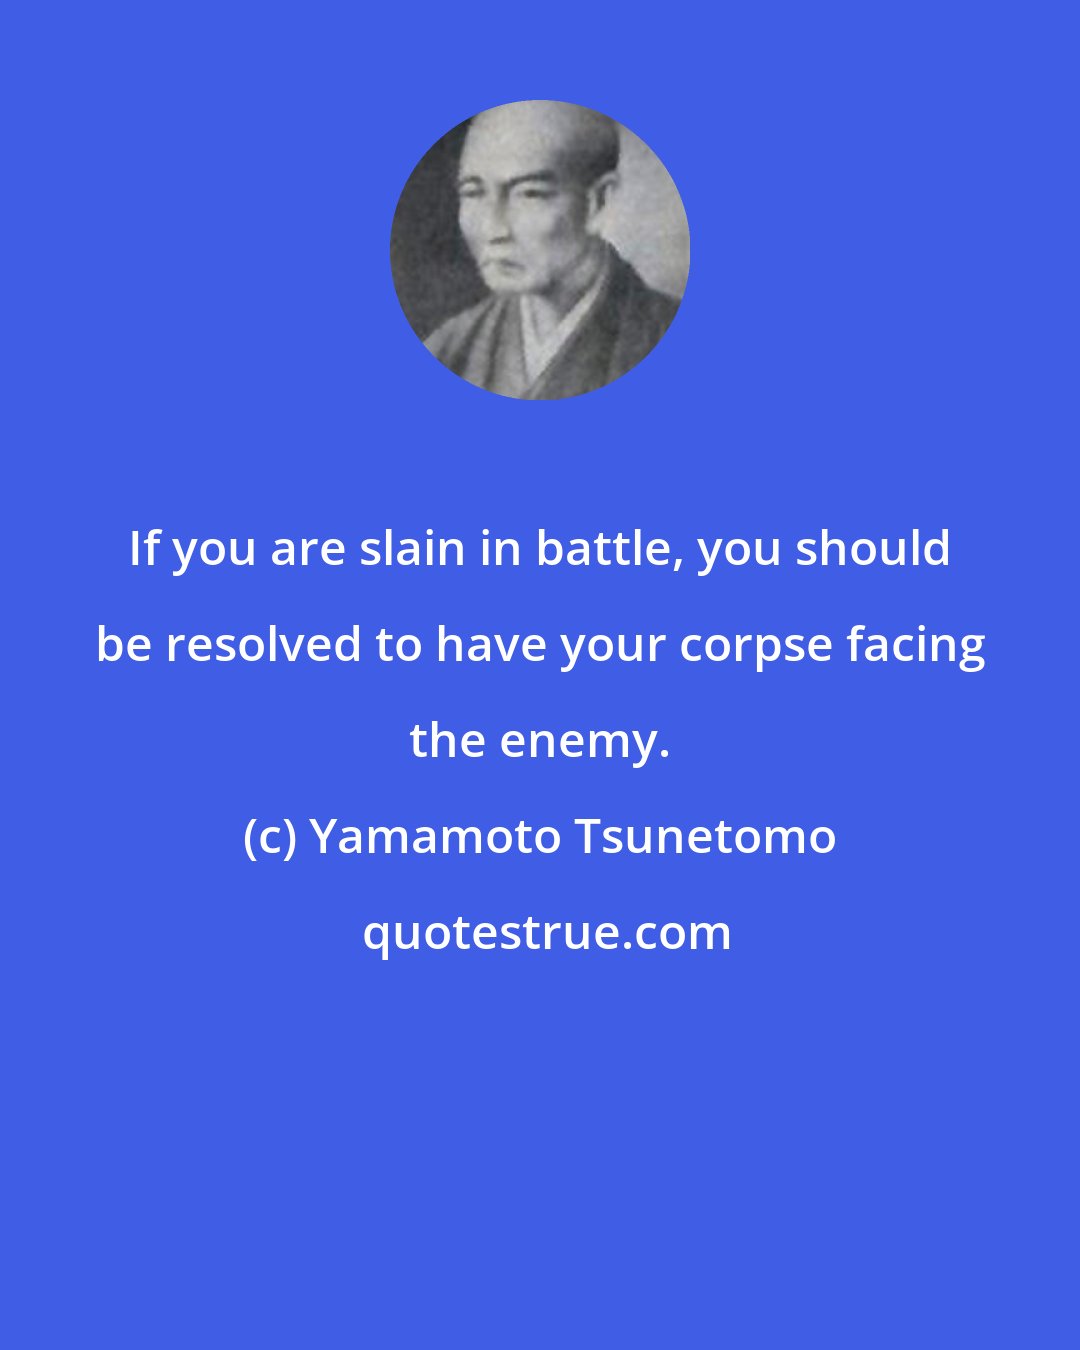 Yamamoto Tsunetomo: If you are slain in battle, you should be resolved to have your corpse facing the enemy.